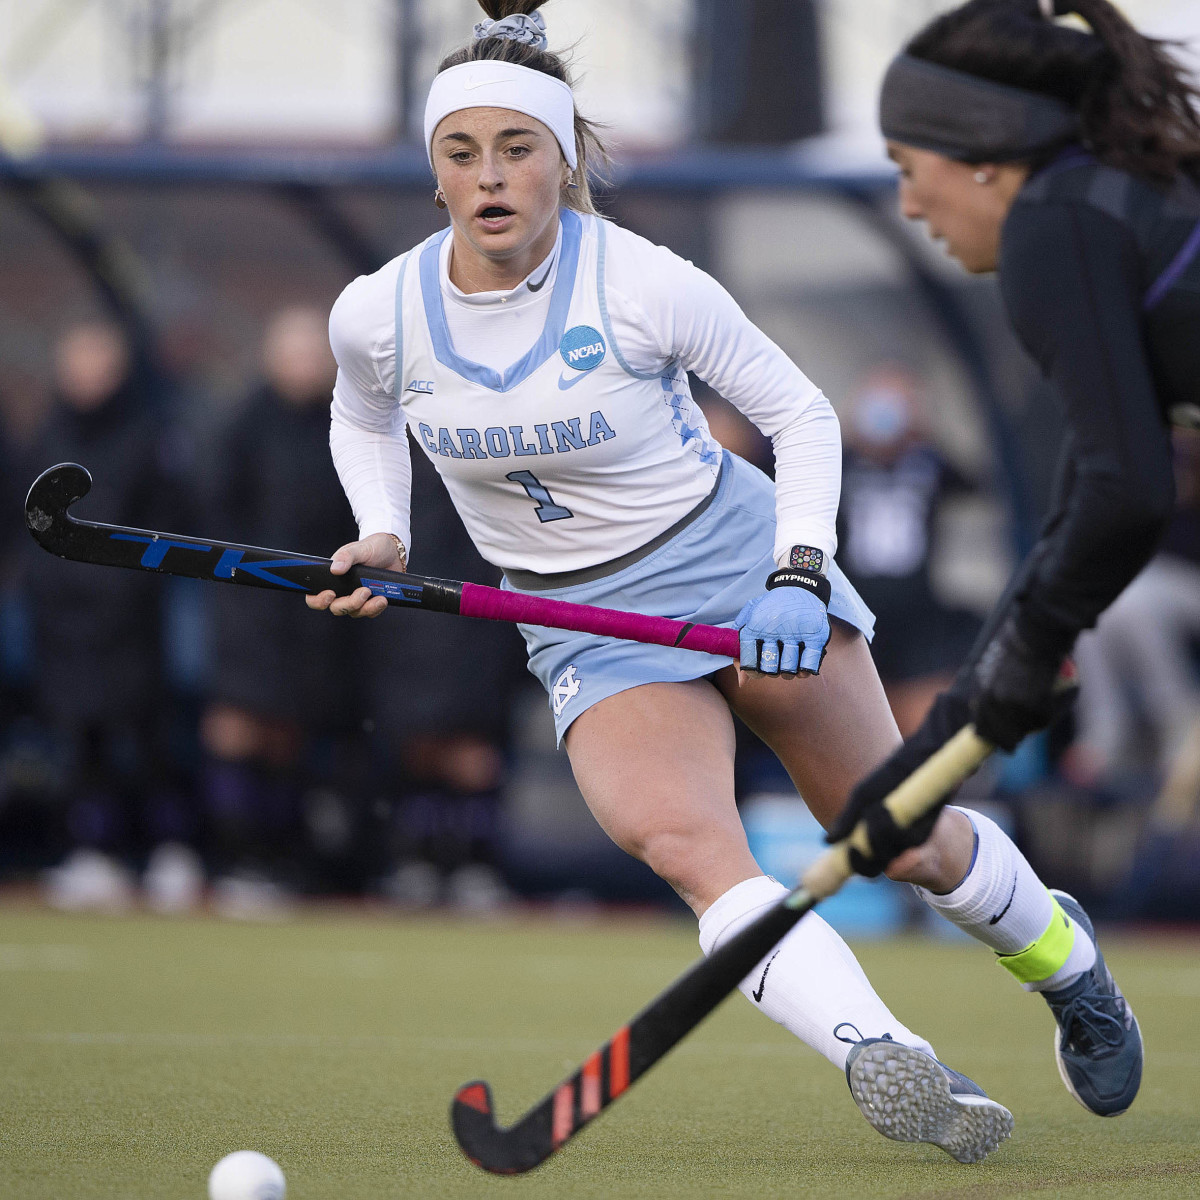 Erin Matson chases after the ball in a North Carolina field hockey game.